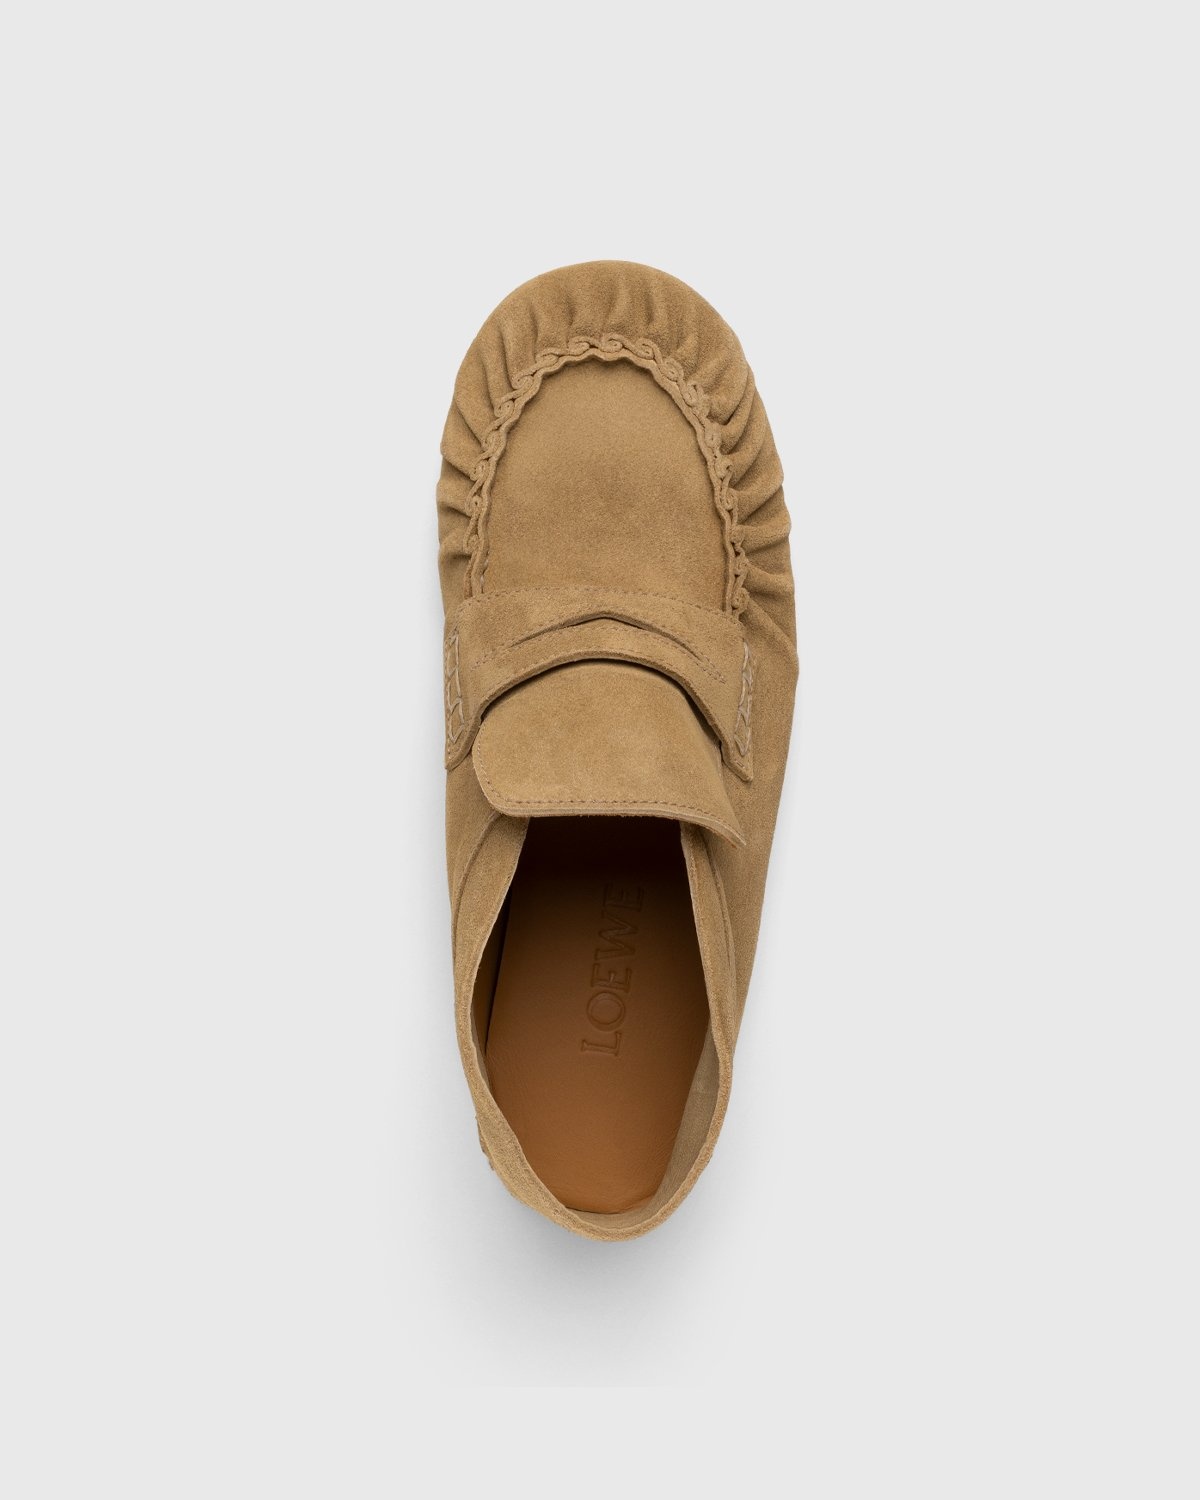 Loewe – Paula's Ibiza Suede Loafer Gold - Shoes - Brown - Image 3